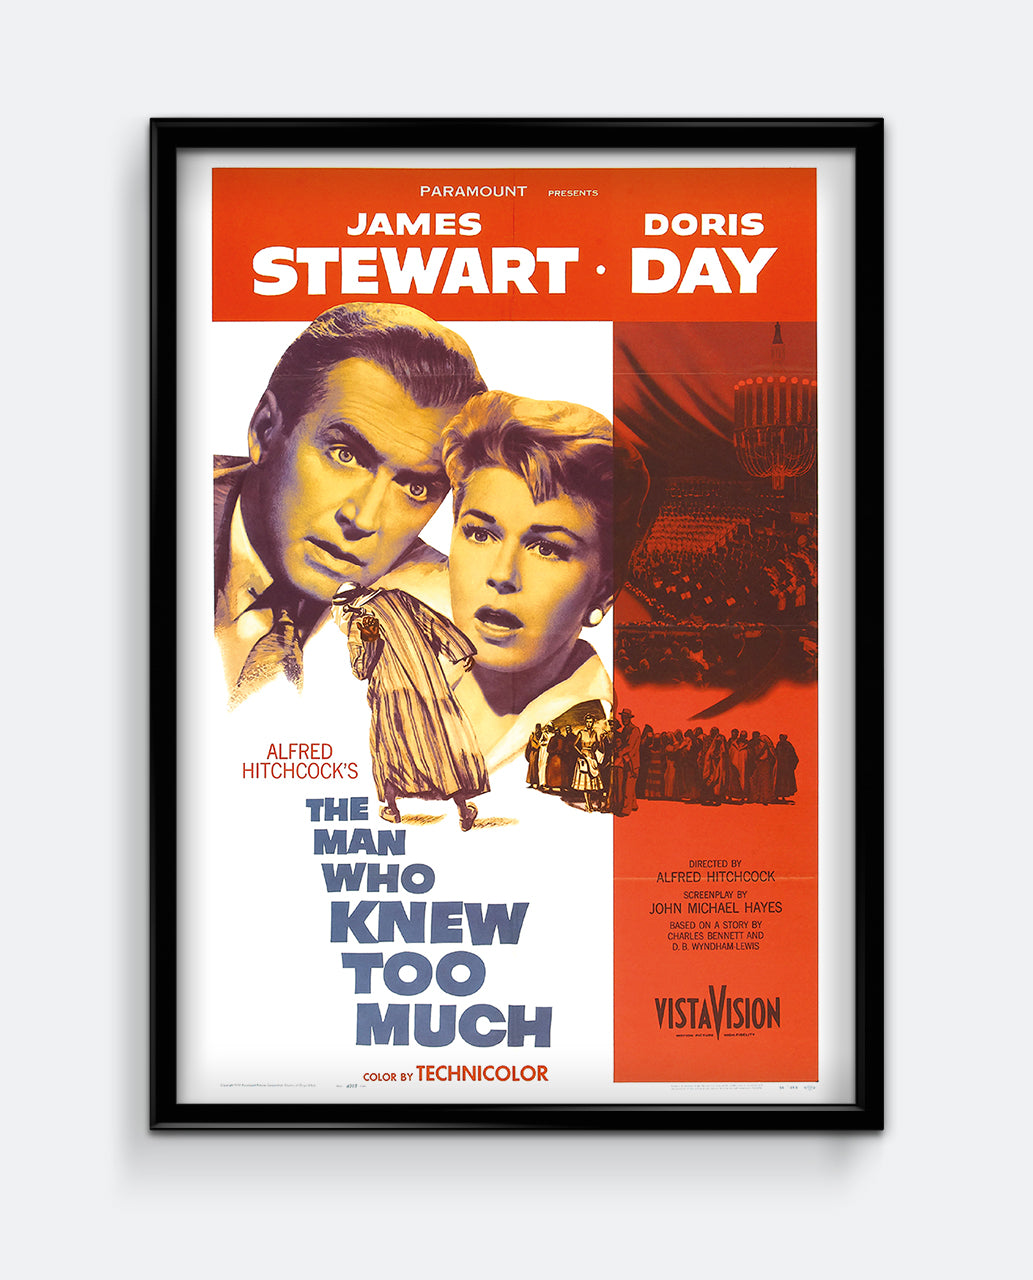 The Man Who Knew Too Much Film Poster